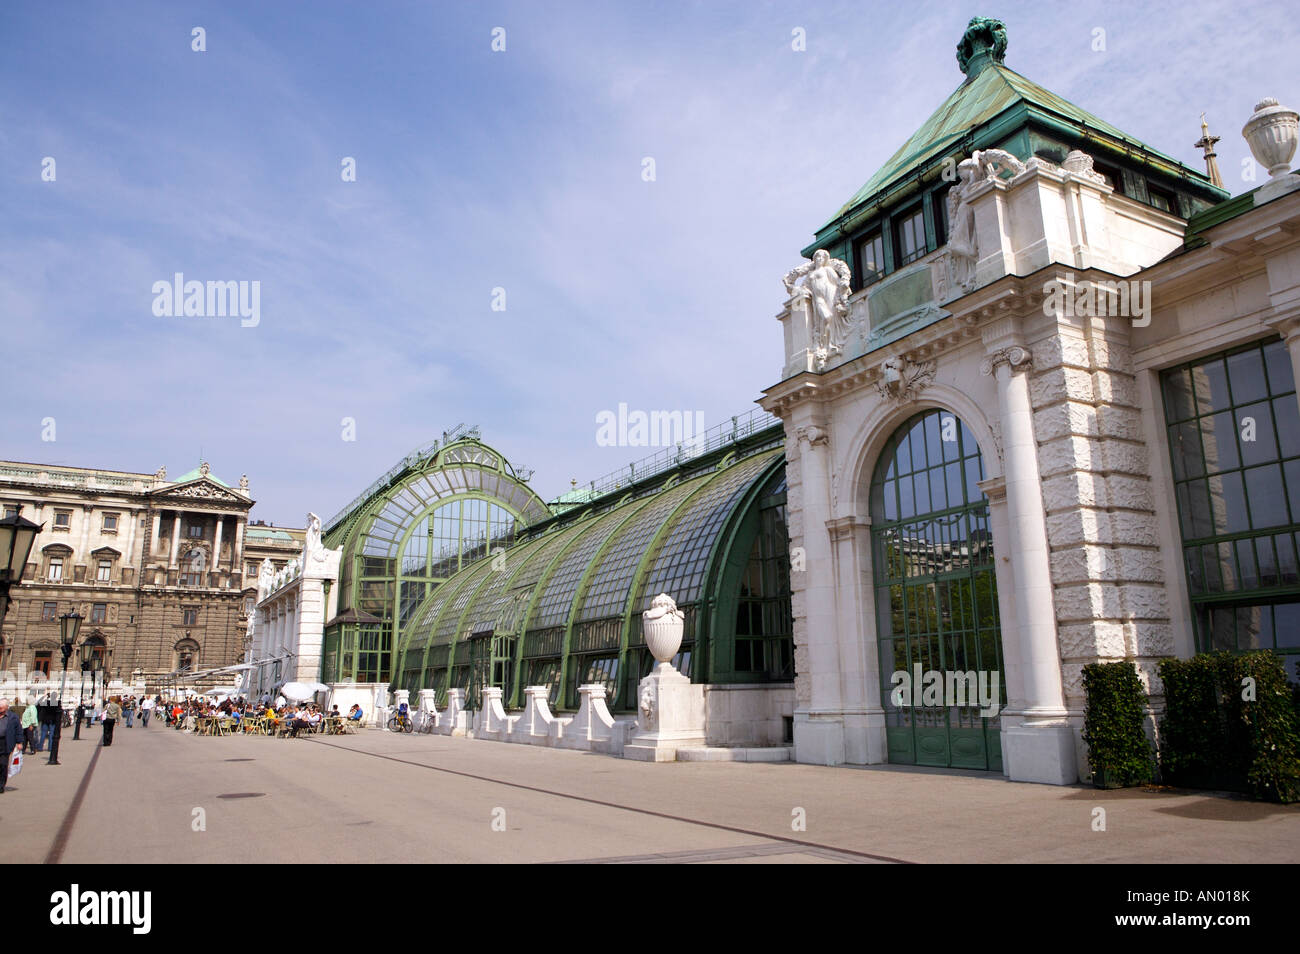 Palmenhaus Cafe and Imperial Bufferfly house in downtown Vienna, Austria, Europe Stock Photo